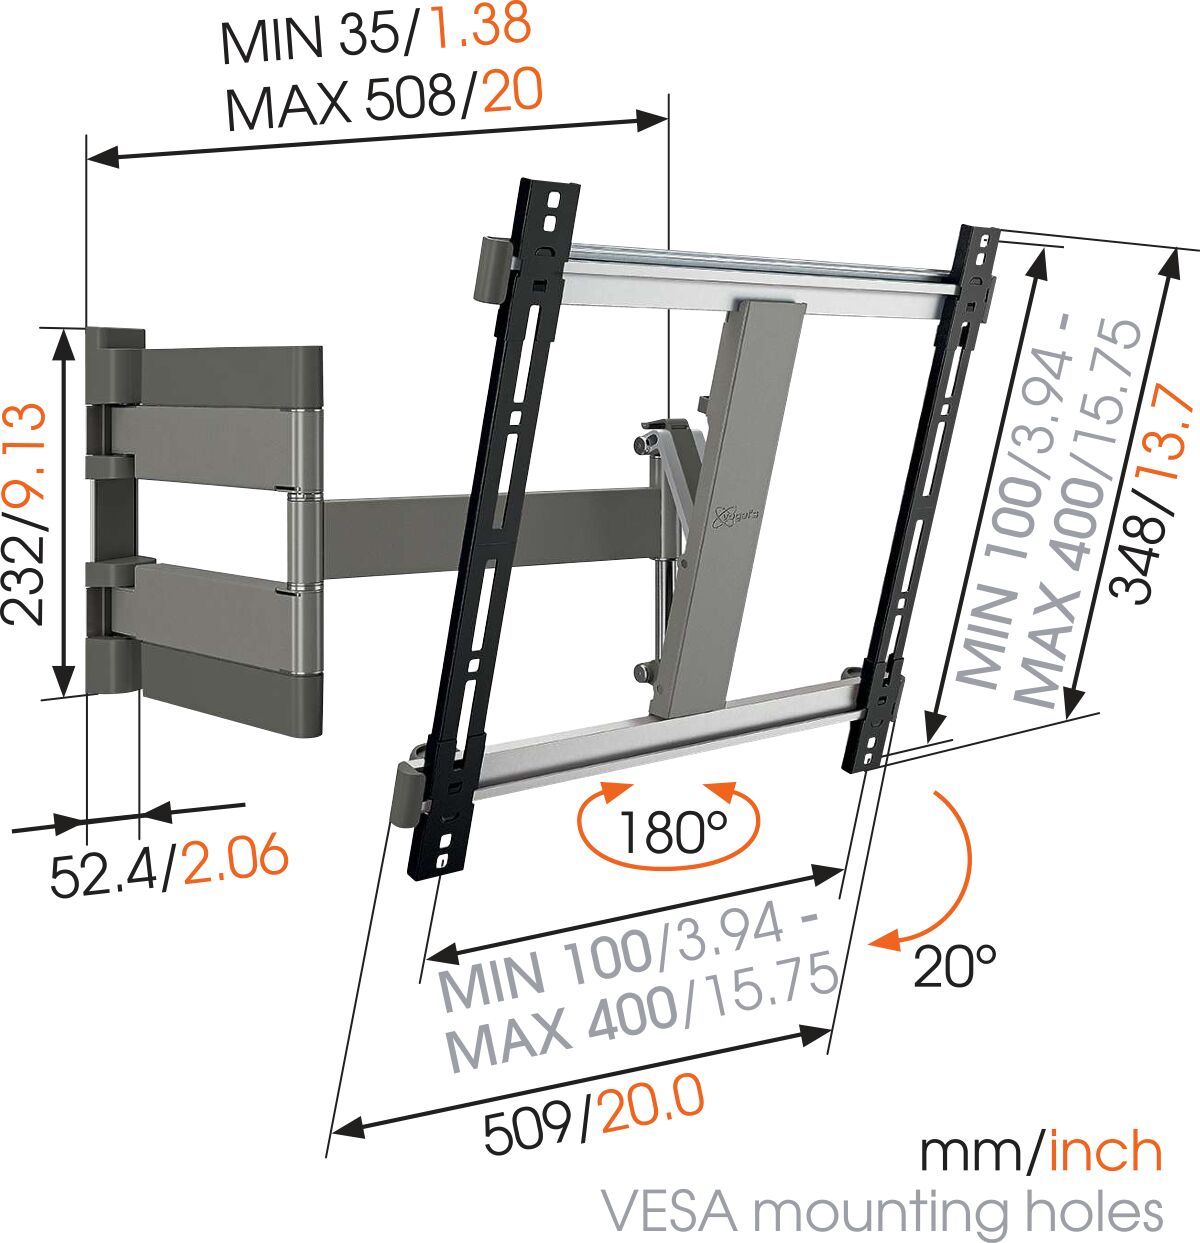 Vogel's THIN 245 UltraThin Full-Motion TV Wall Mount (black) - Suitable for 26 up to 55 inch TVs - Full motion (up to 180°) - Tilt up to 20° - Dimensions